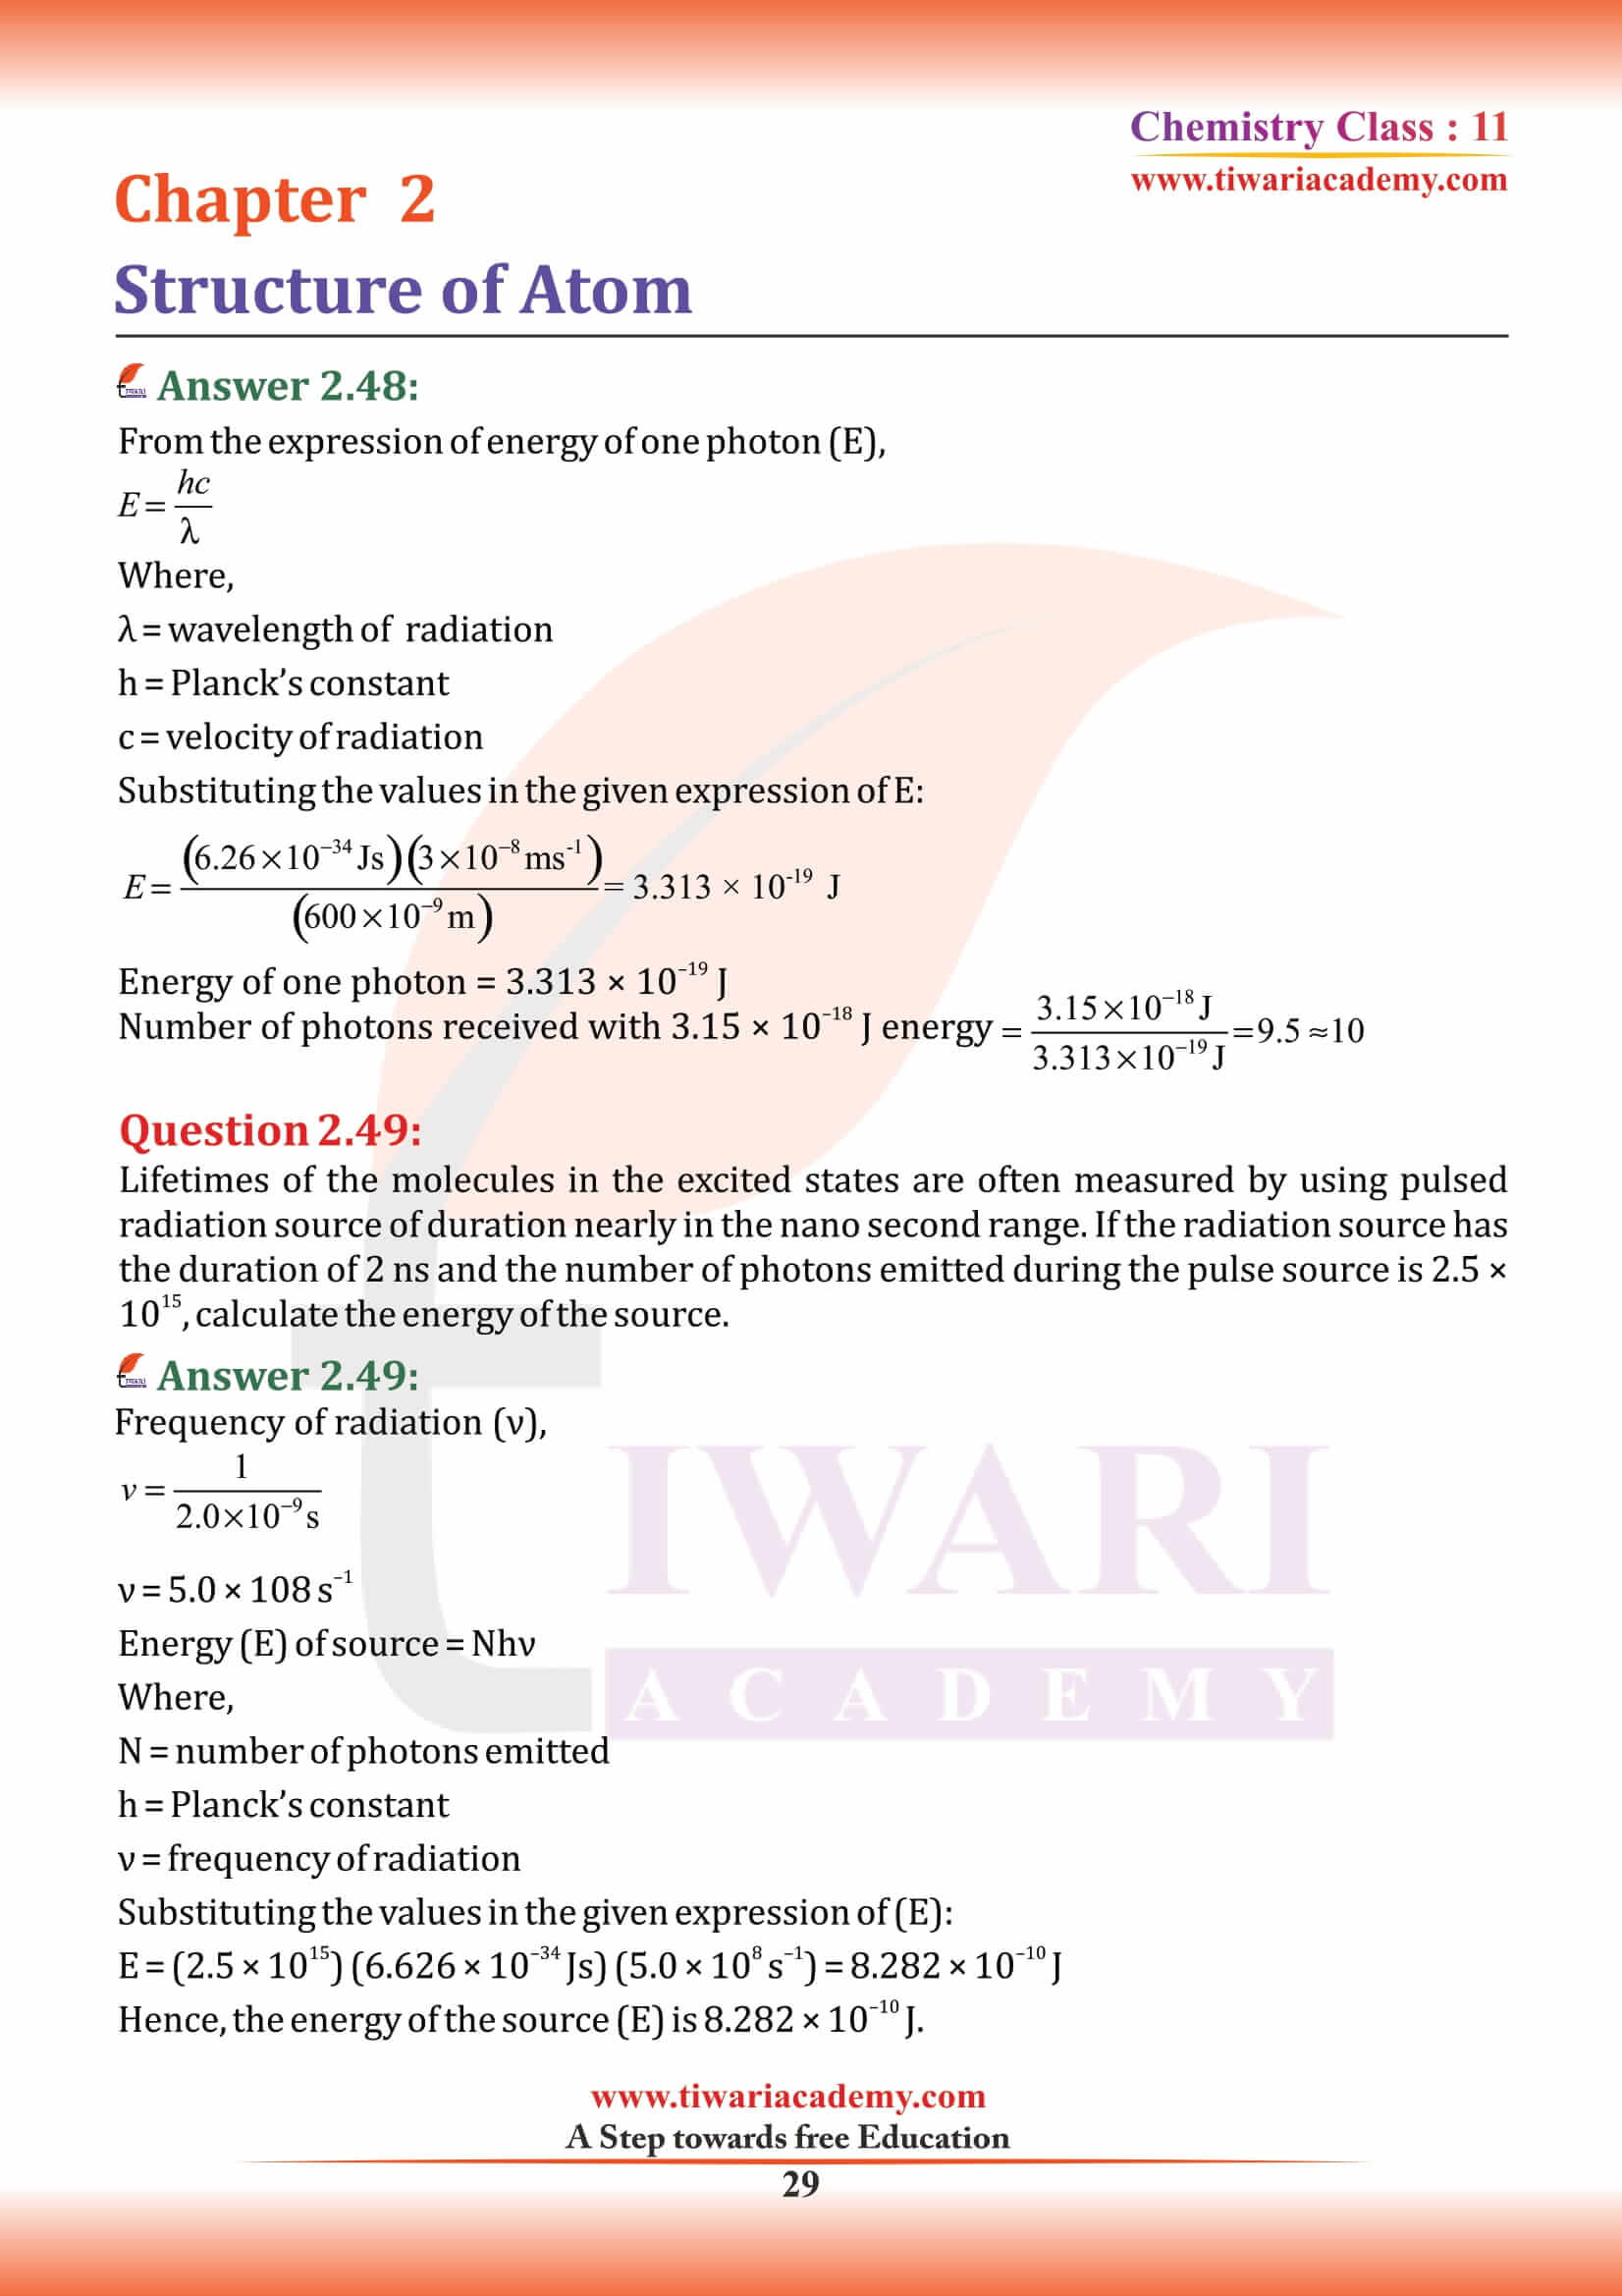 Class 11 Chemistry Chapter 2 guide download